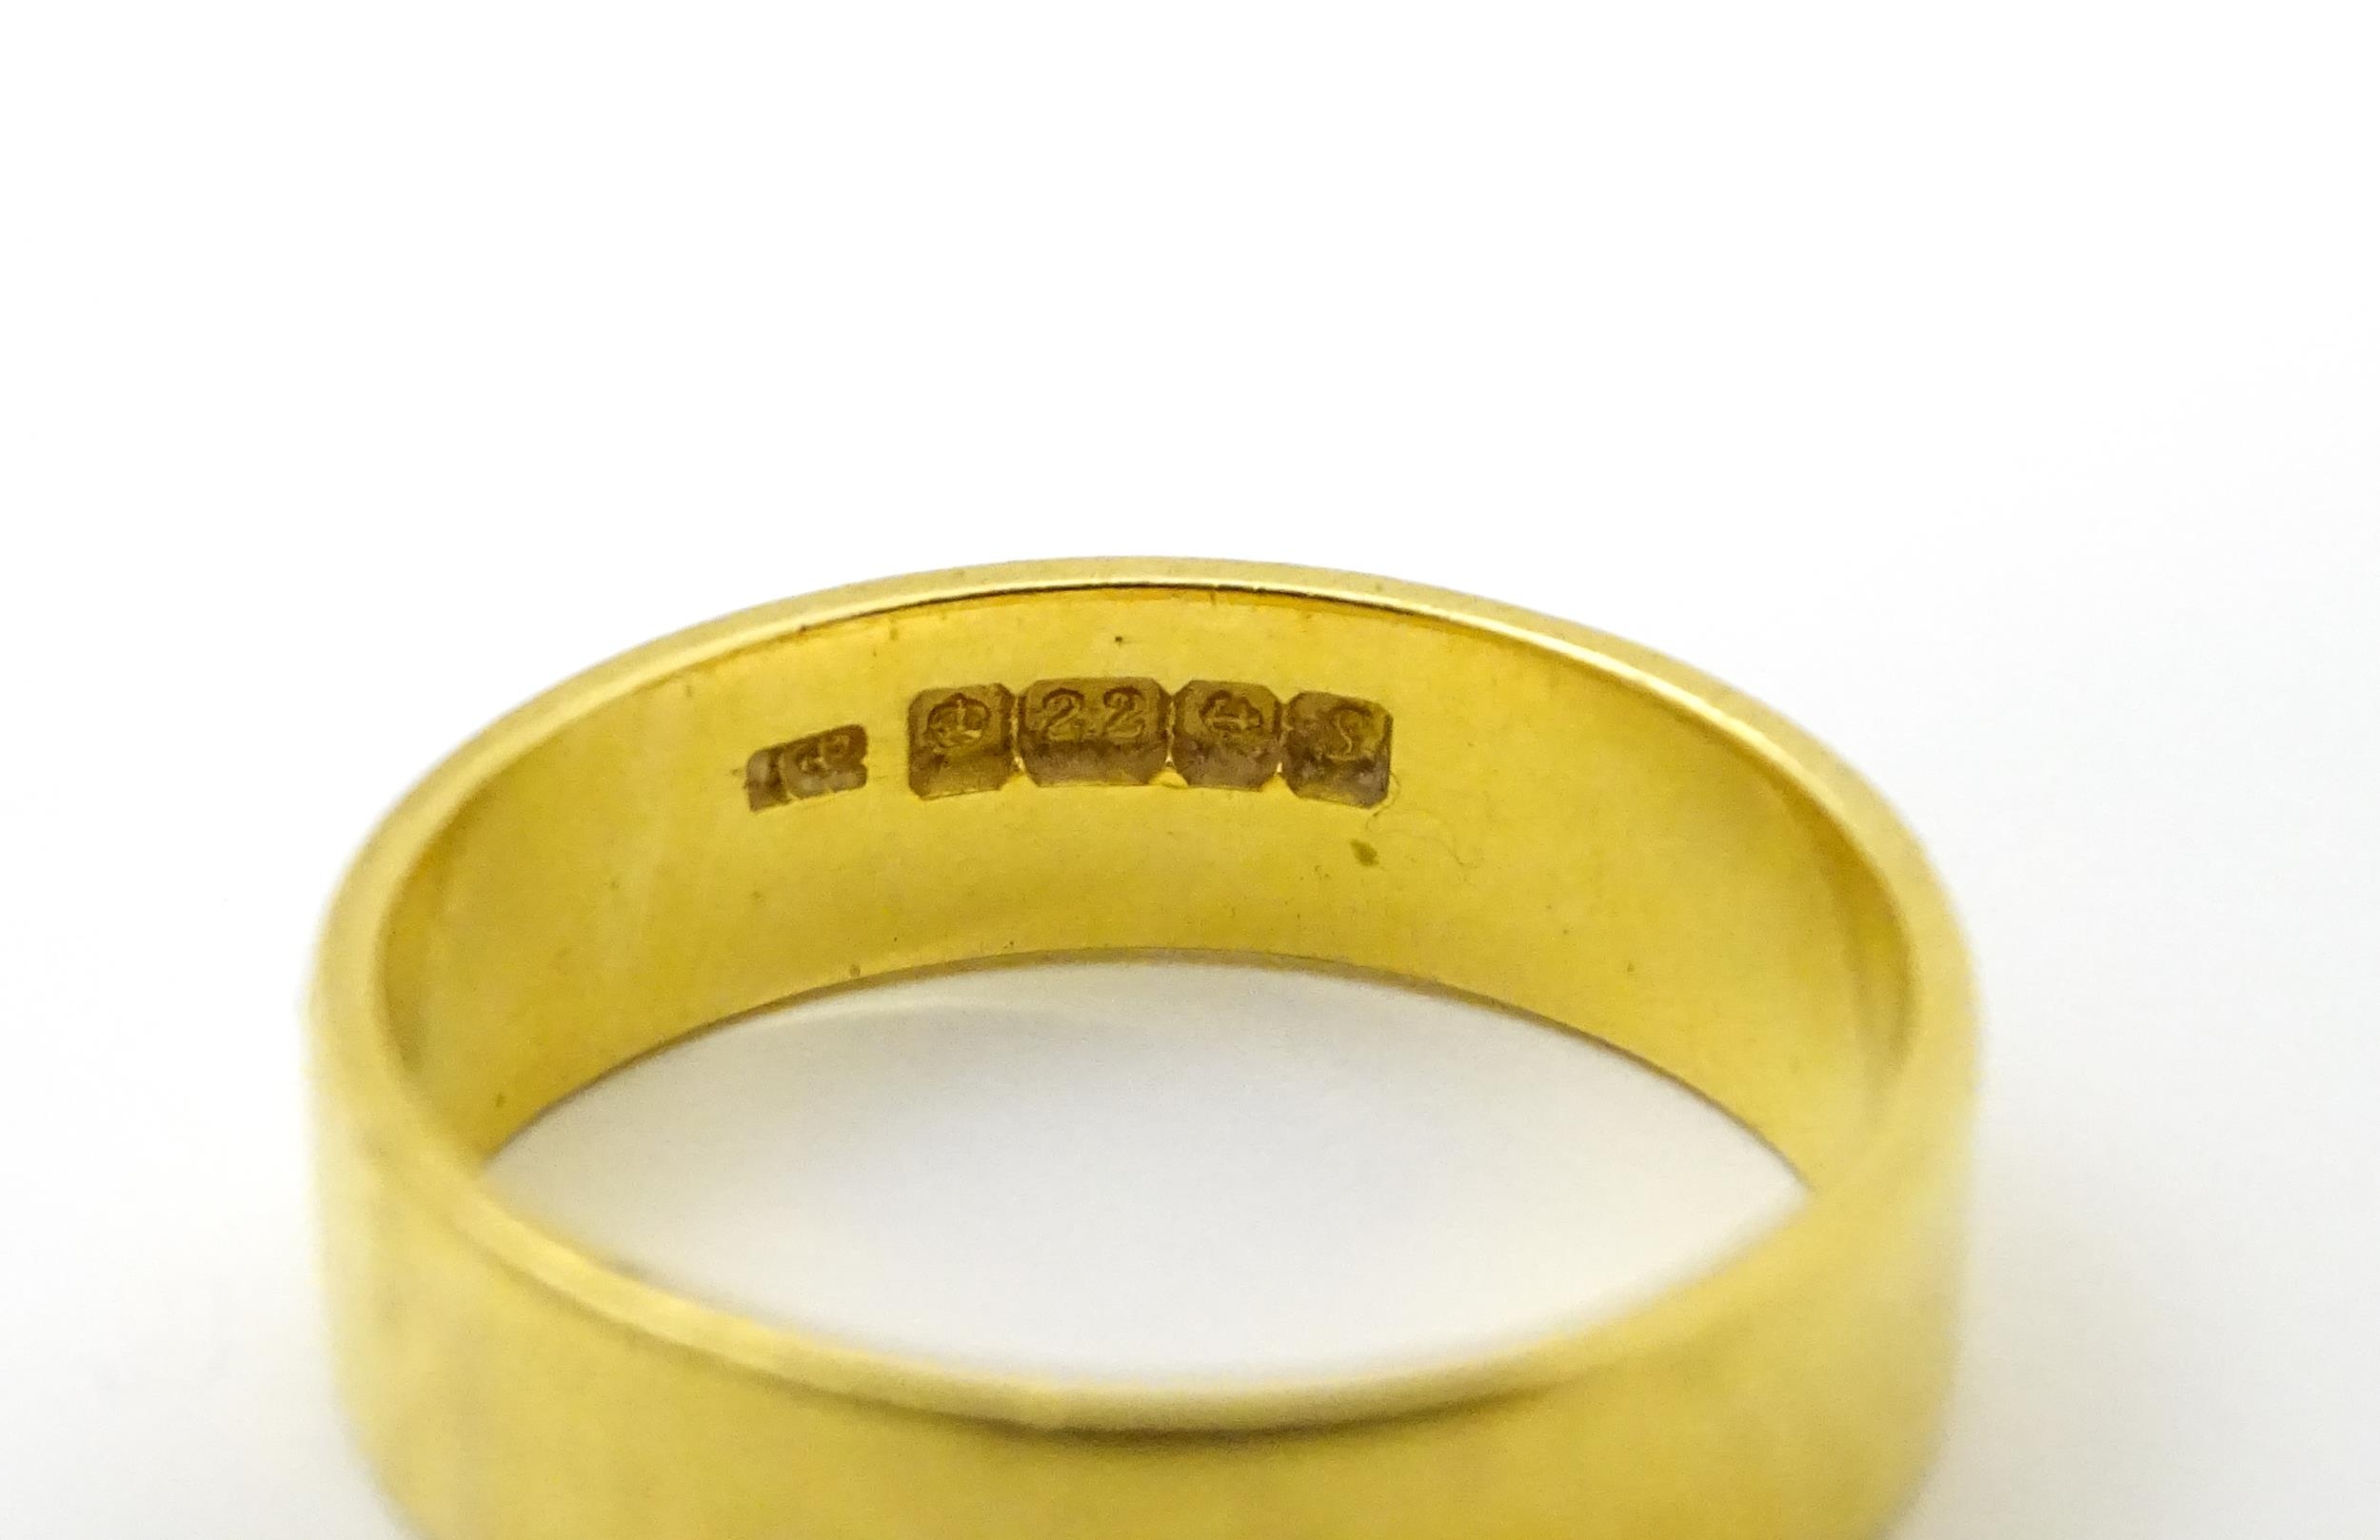 A 22ct gold ring / wedding band. Ring size approx. M 1/2 Please Note - we do not make reference to - Image 4 of 6